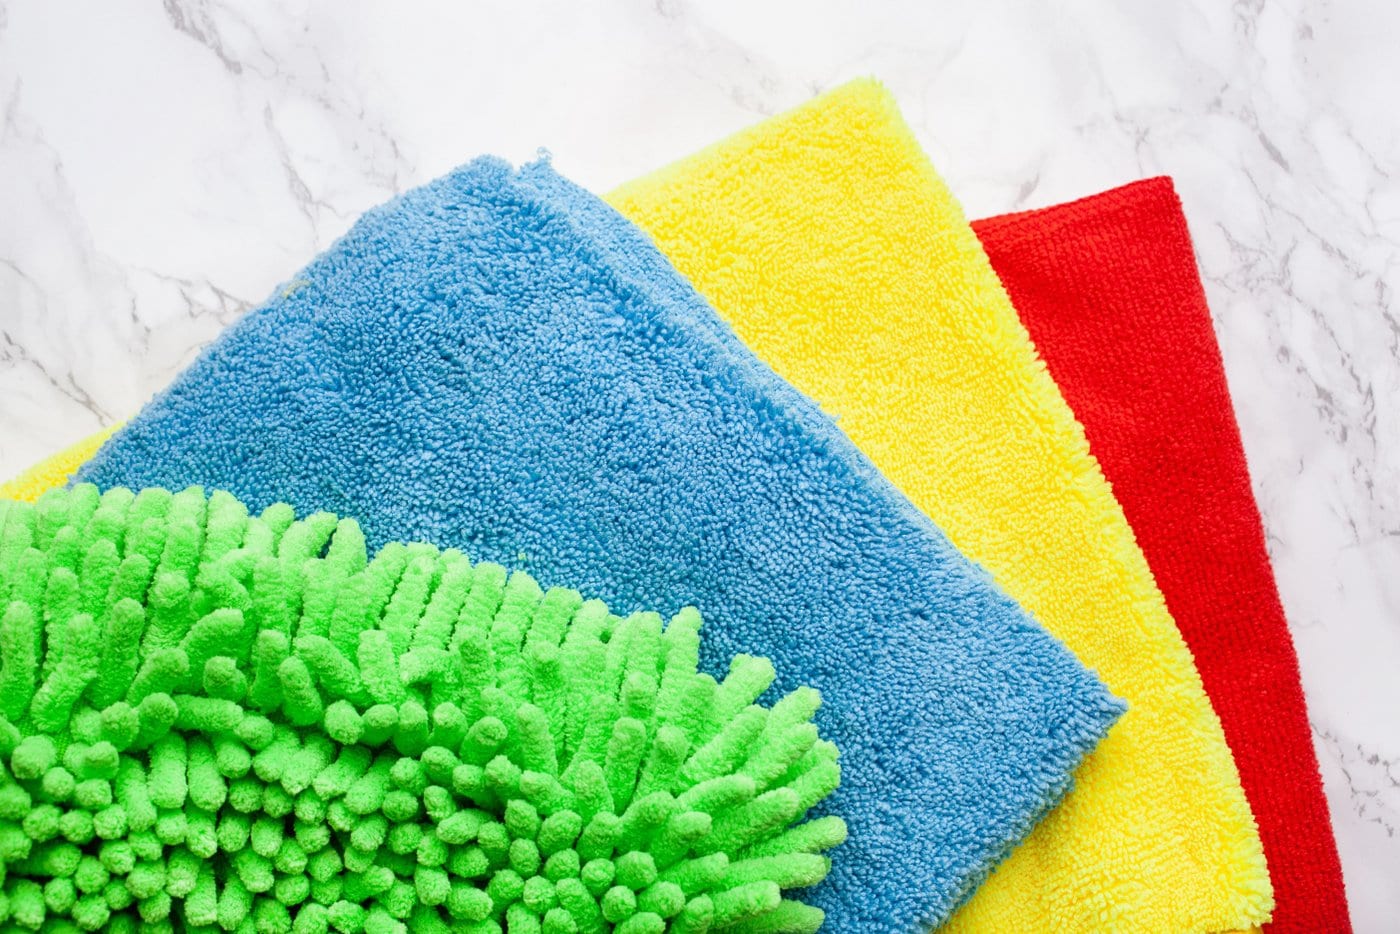 Colorful microfiber cleaning cloths